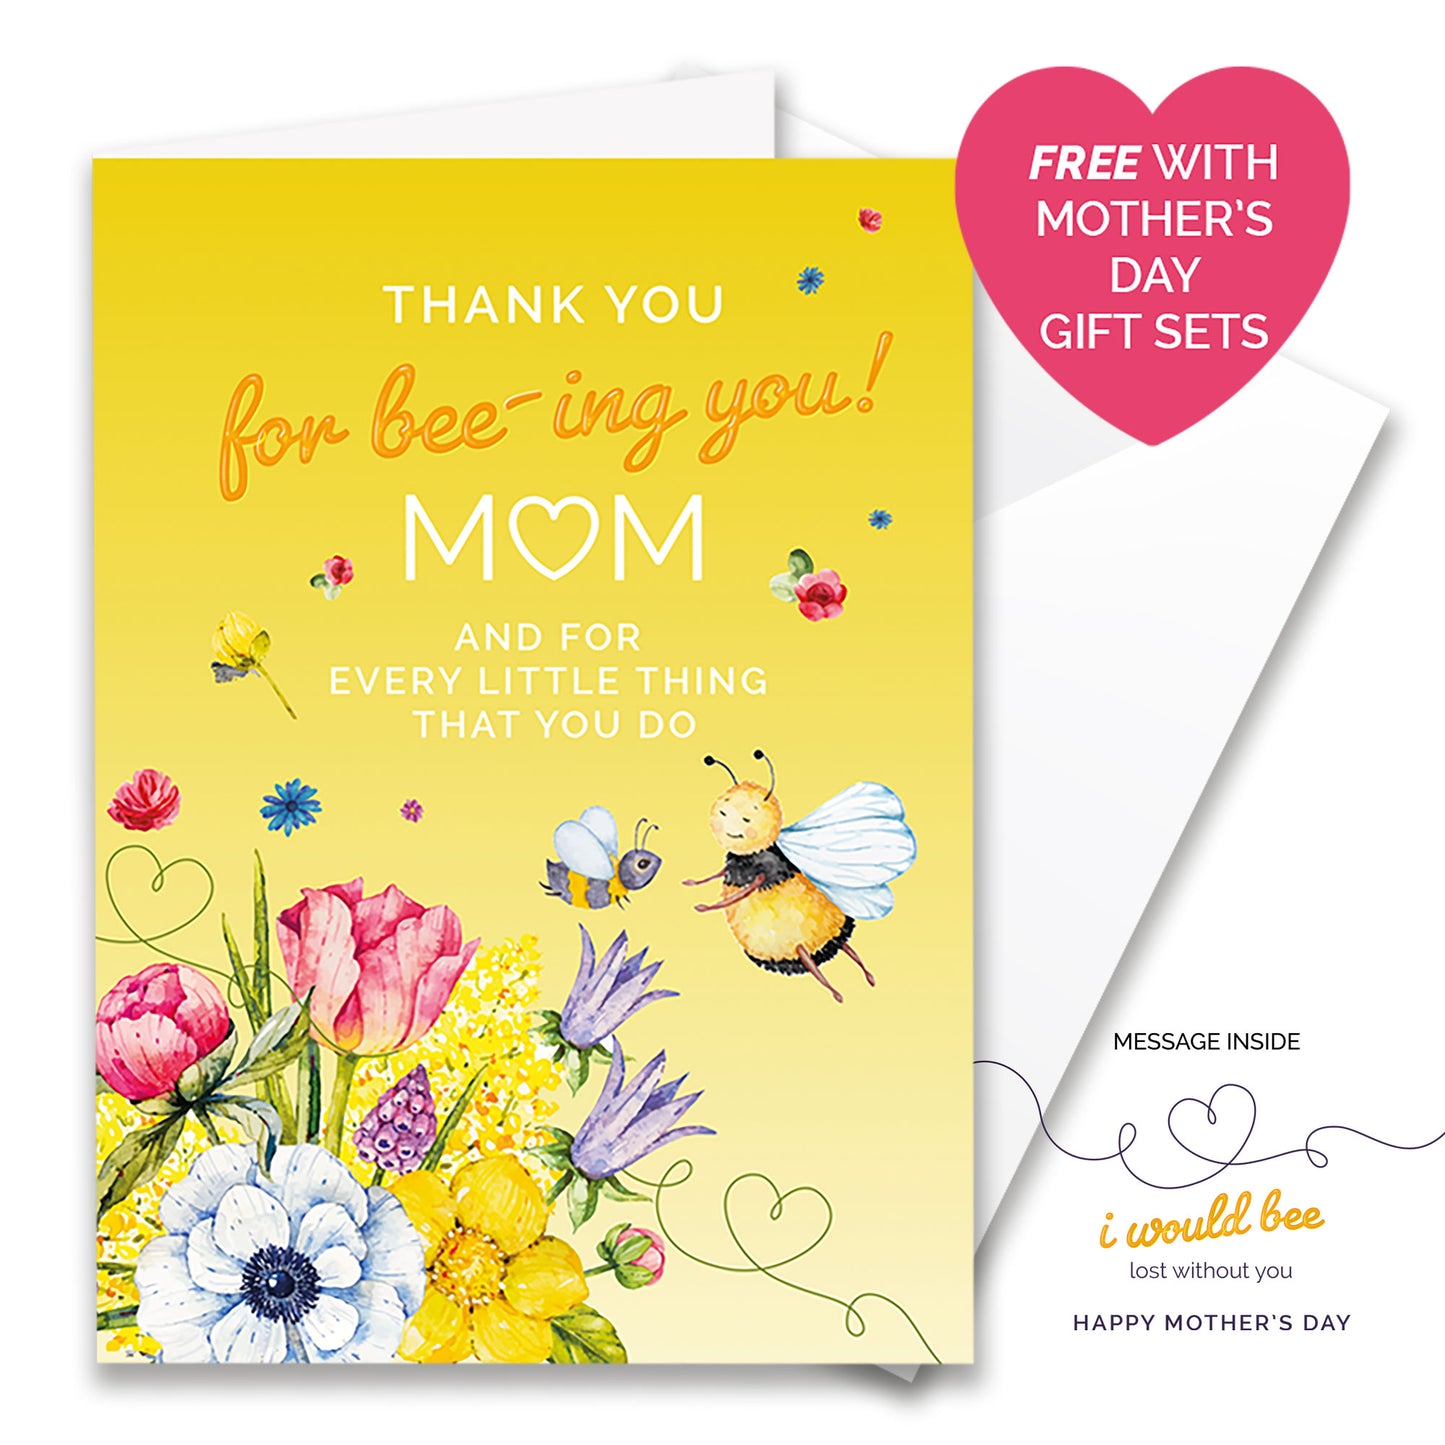 Mother's Day £50 Gift Set